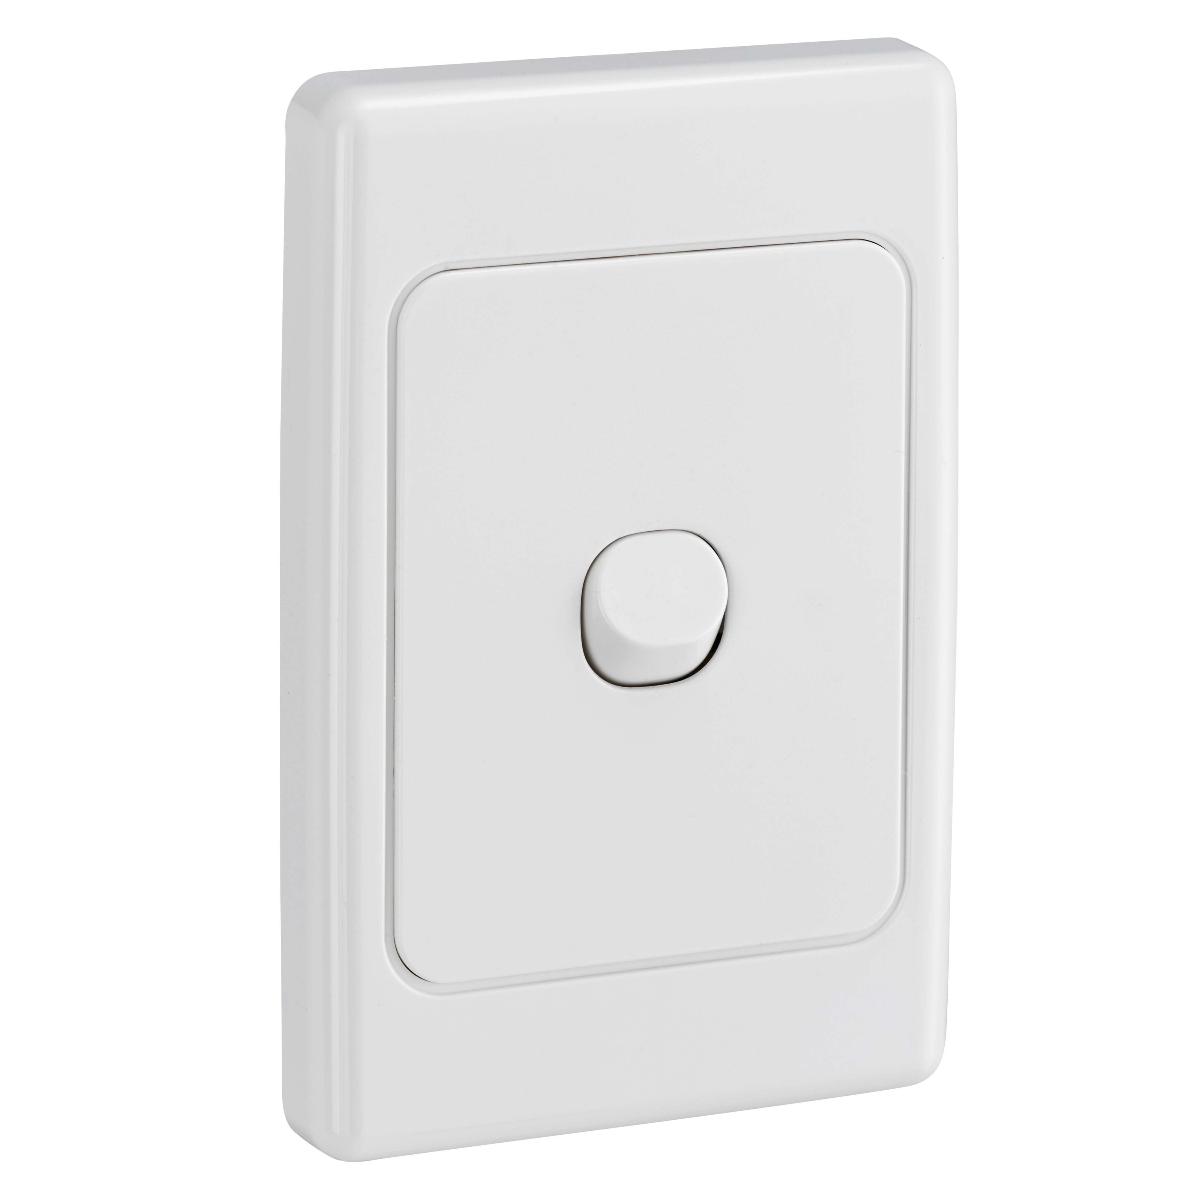 SWITCH 1GANG VERTICAL 10A IP66 WHITE